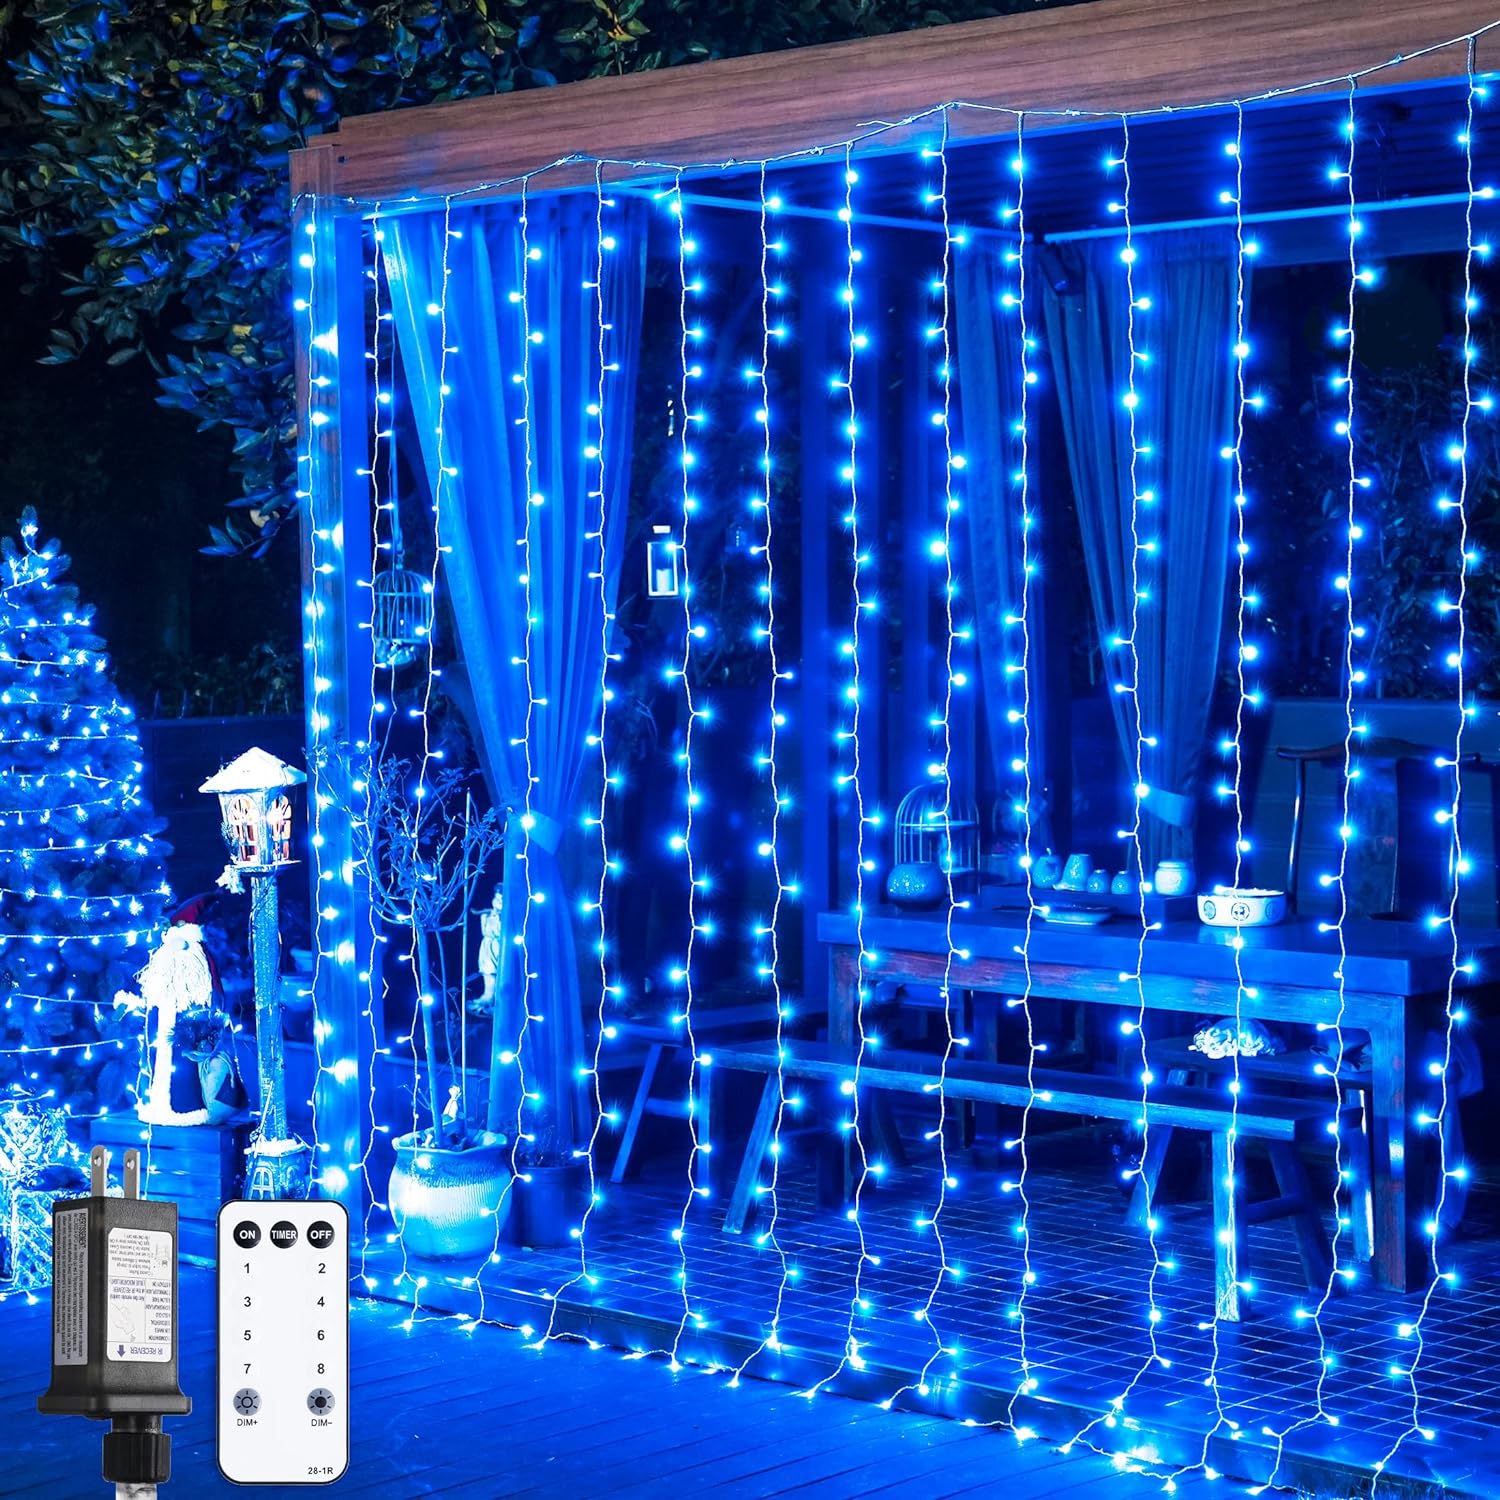 JMEXSUSS 300LED Blue Curtain Lights, Christmas Curtain Hanging Lights with Remote, Blue String Lights for Wall Window Backdrop Garden Christmas Indoor Outdoor Decorations